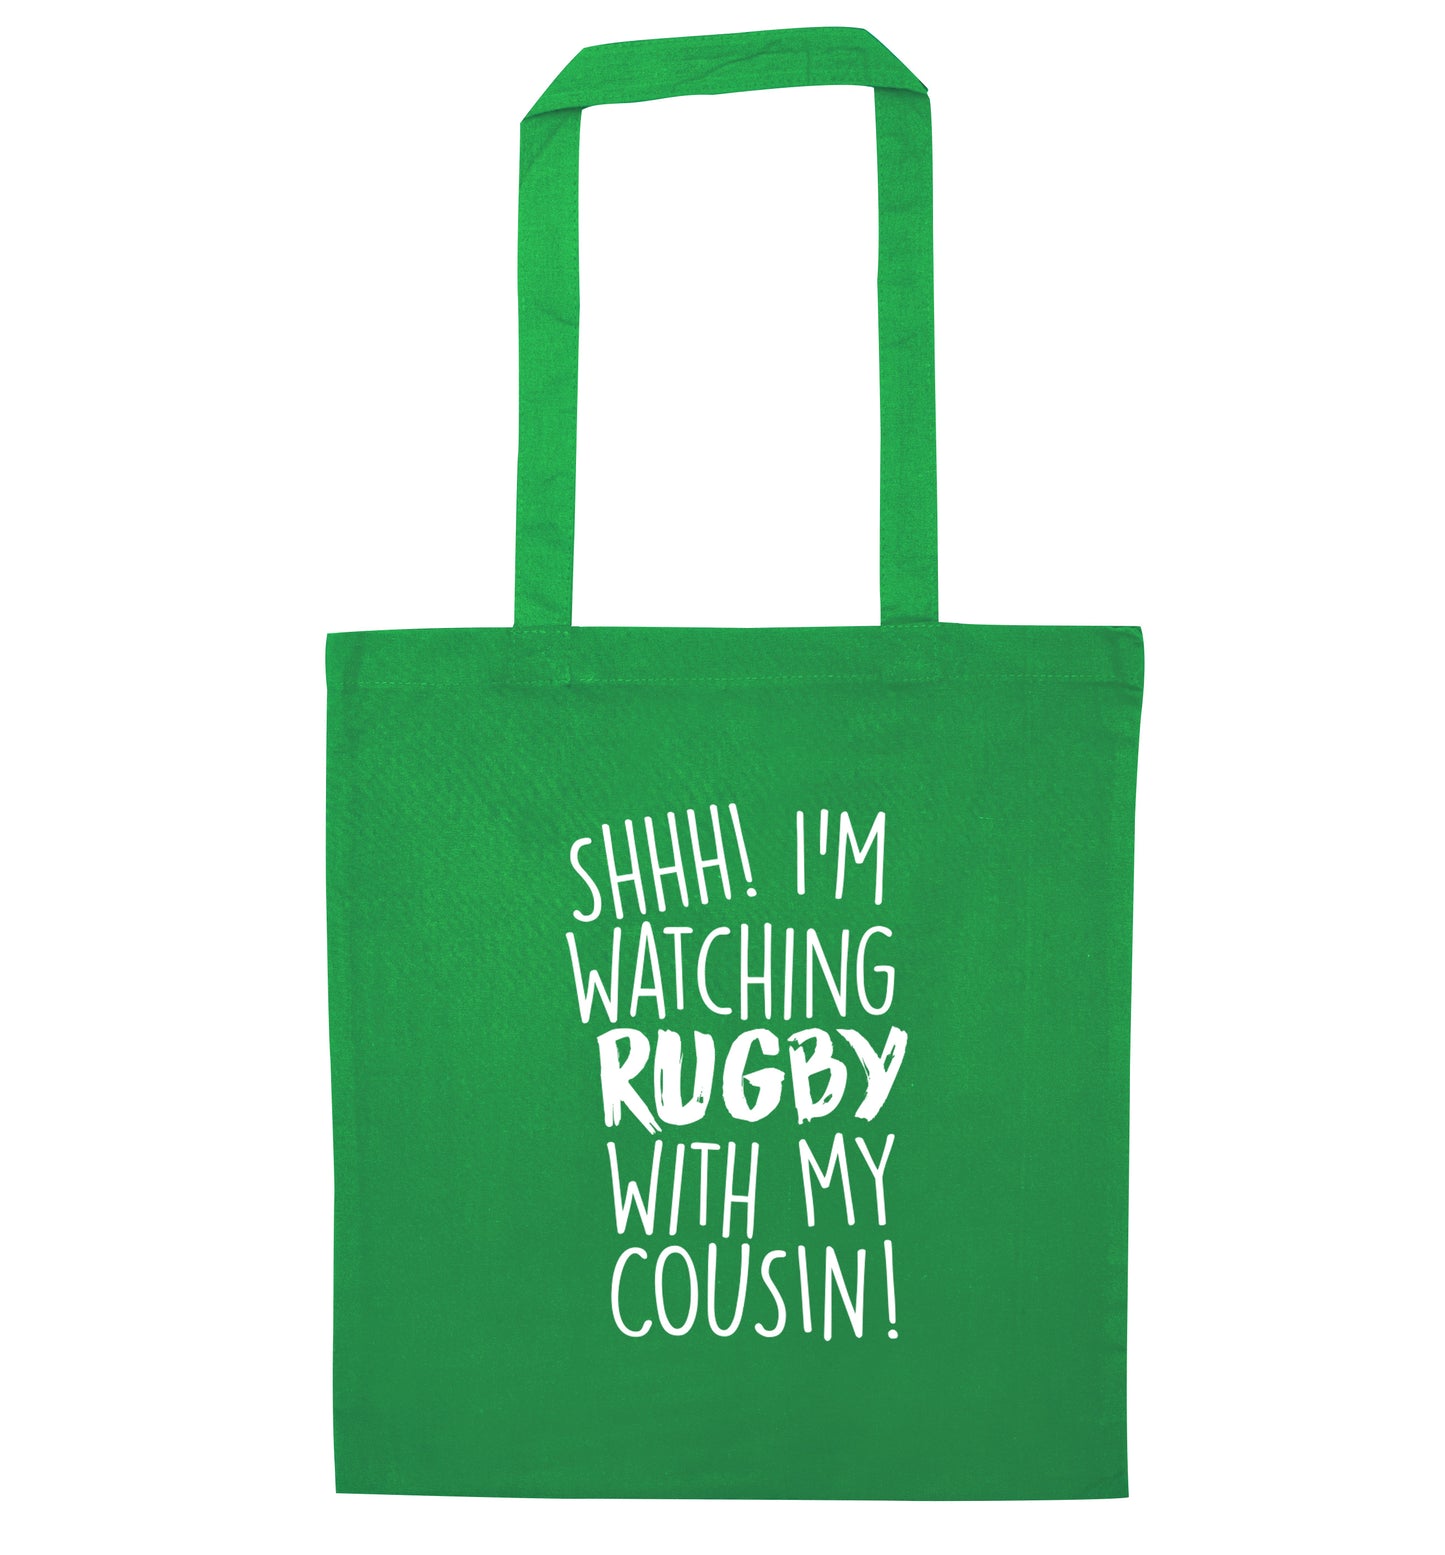 Shhh I'm watching rugby with my cousin green tote bag